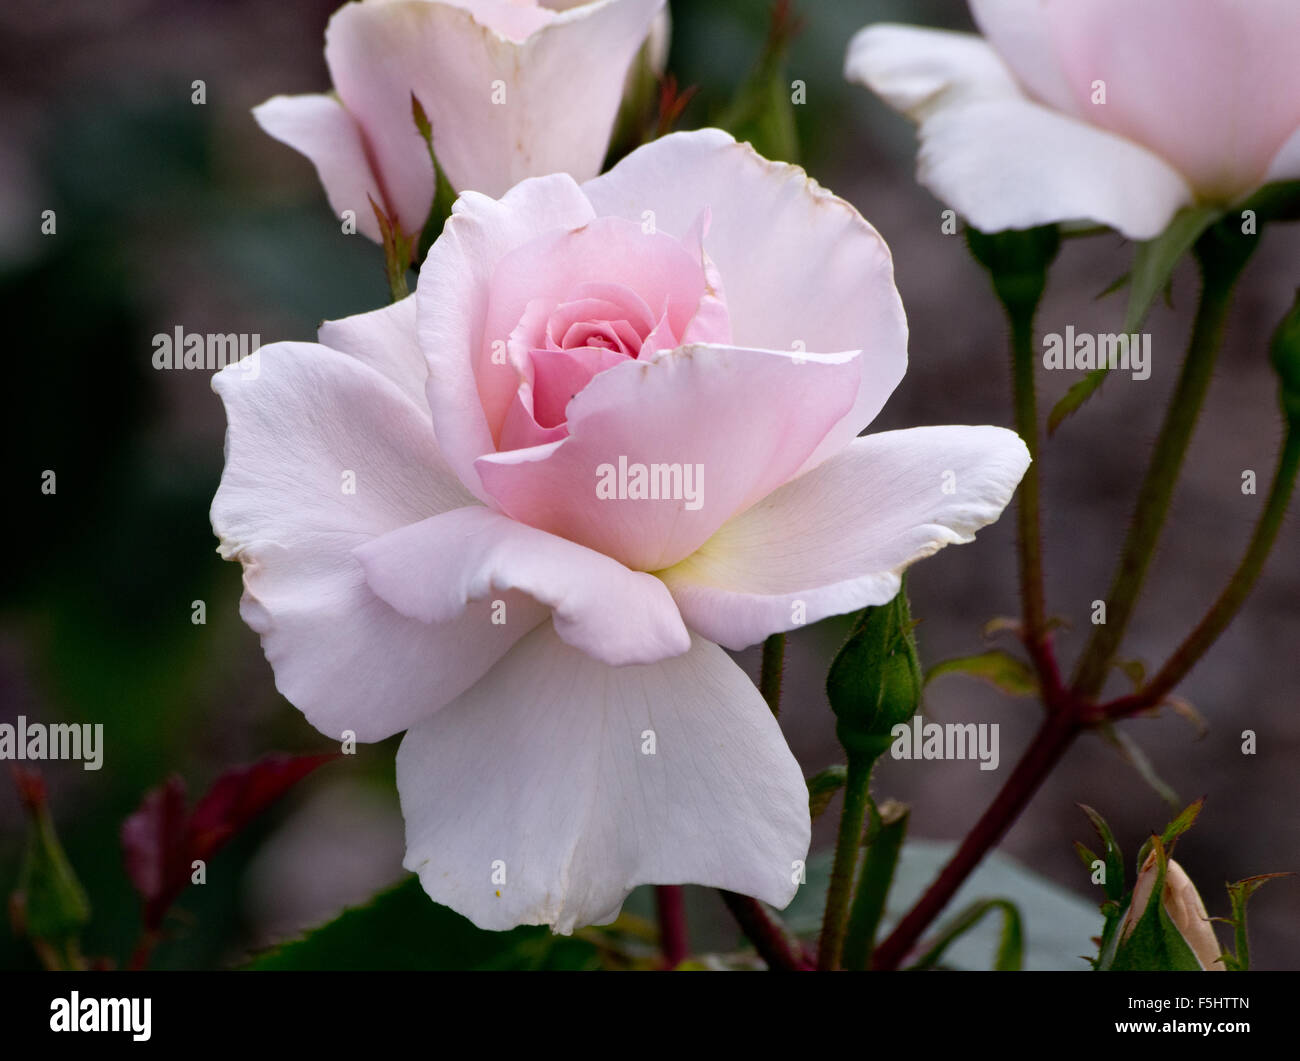 A Whiter Shade of Pale Rose Stockfoto